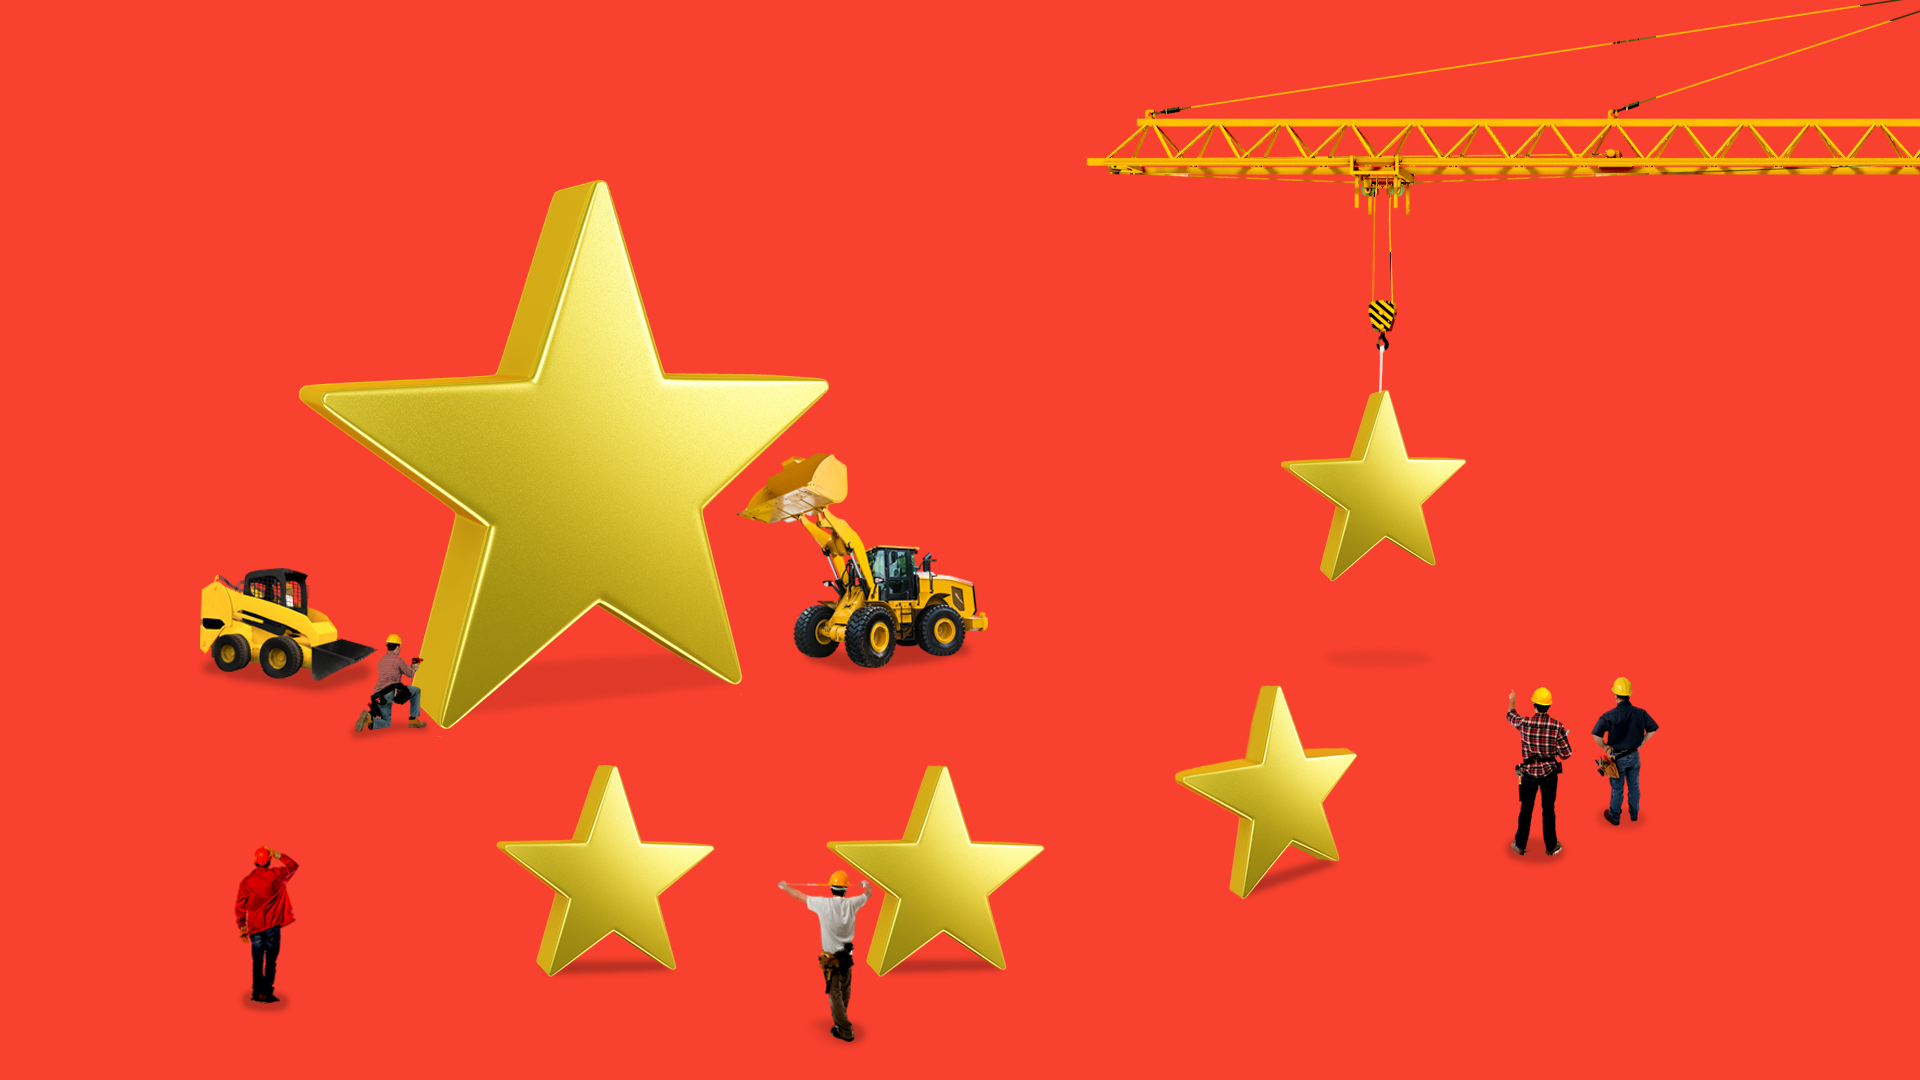 constructions workers and equipment around stars of Chinese flag